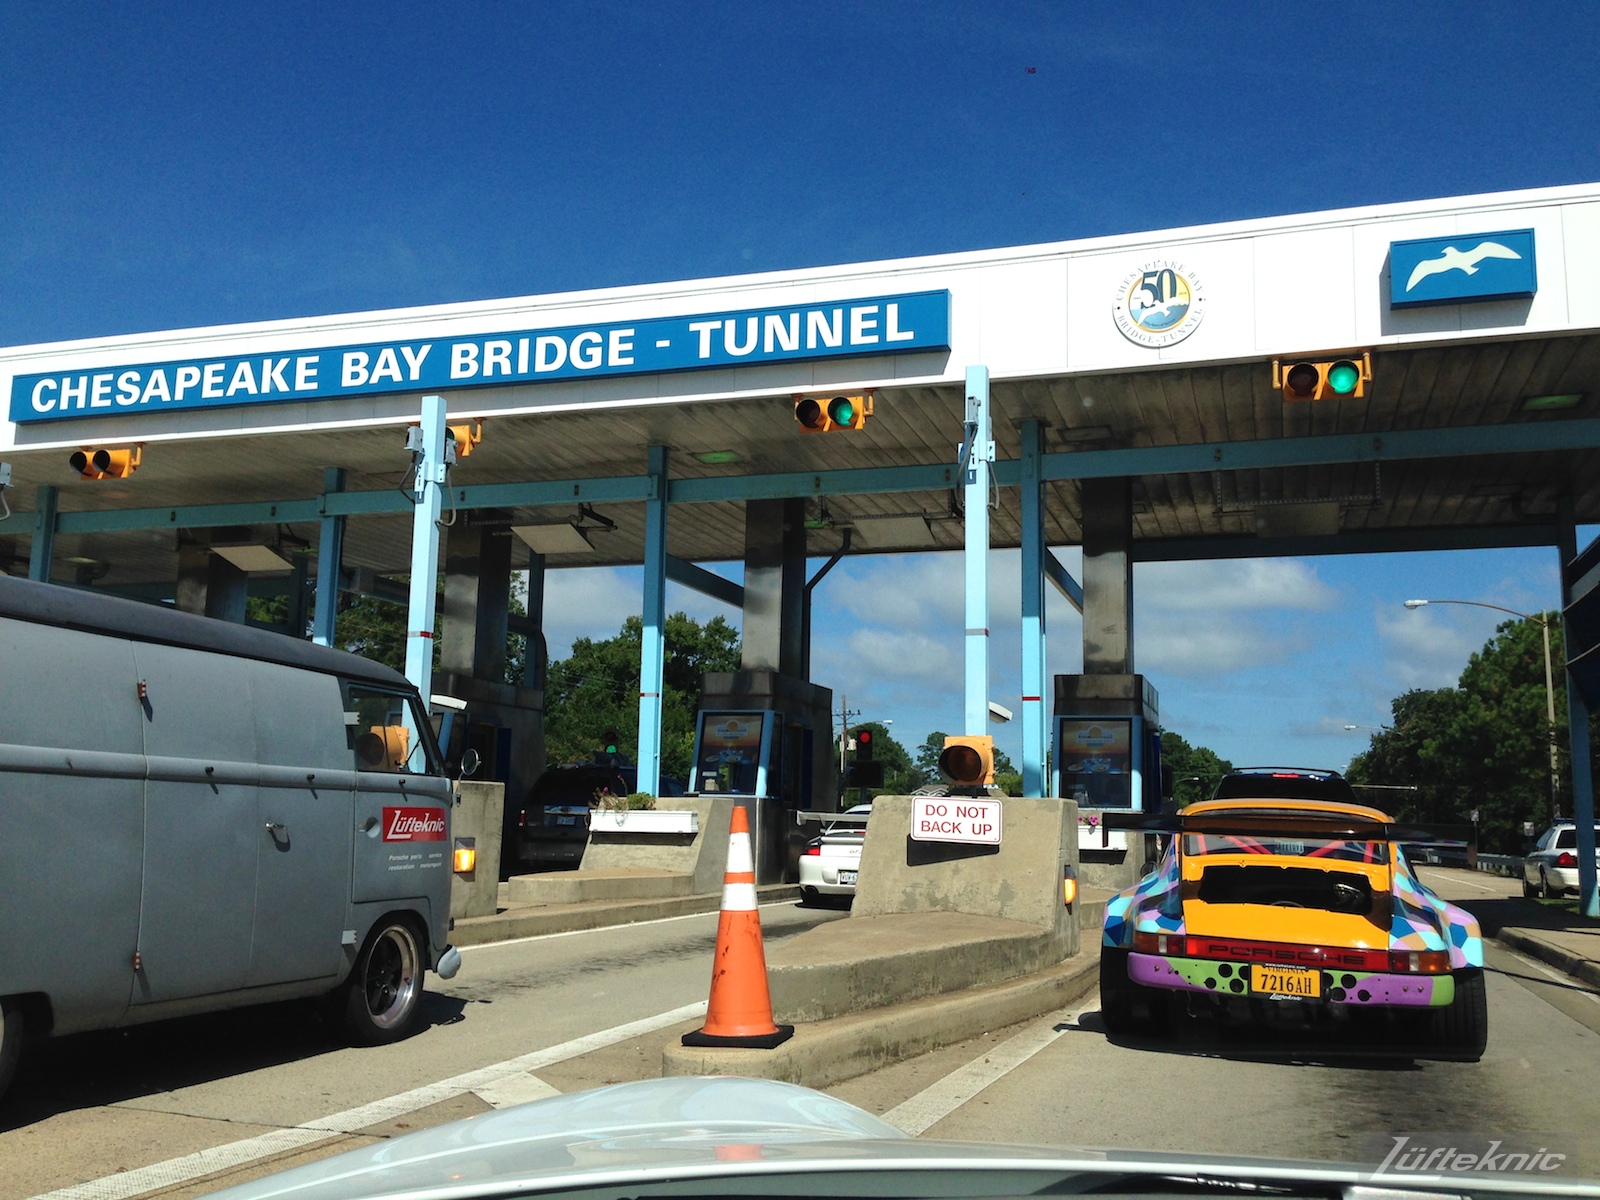 The Lüfteknic #projectstuka Porsche 930 Turbo and porschebus paying the toll at the Chesapeake bay bridge tunnel.